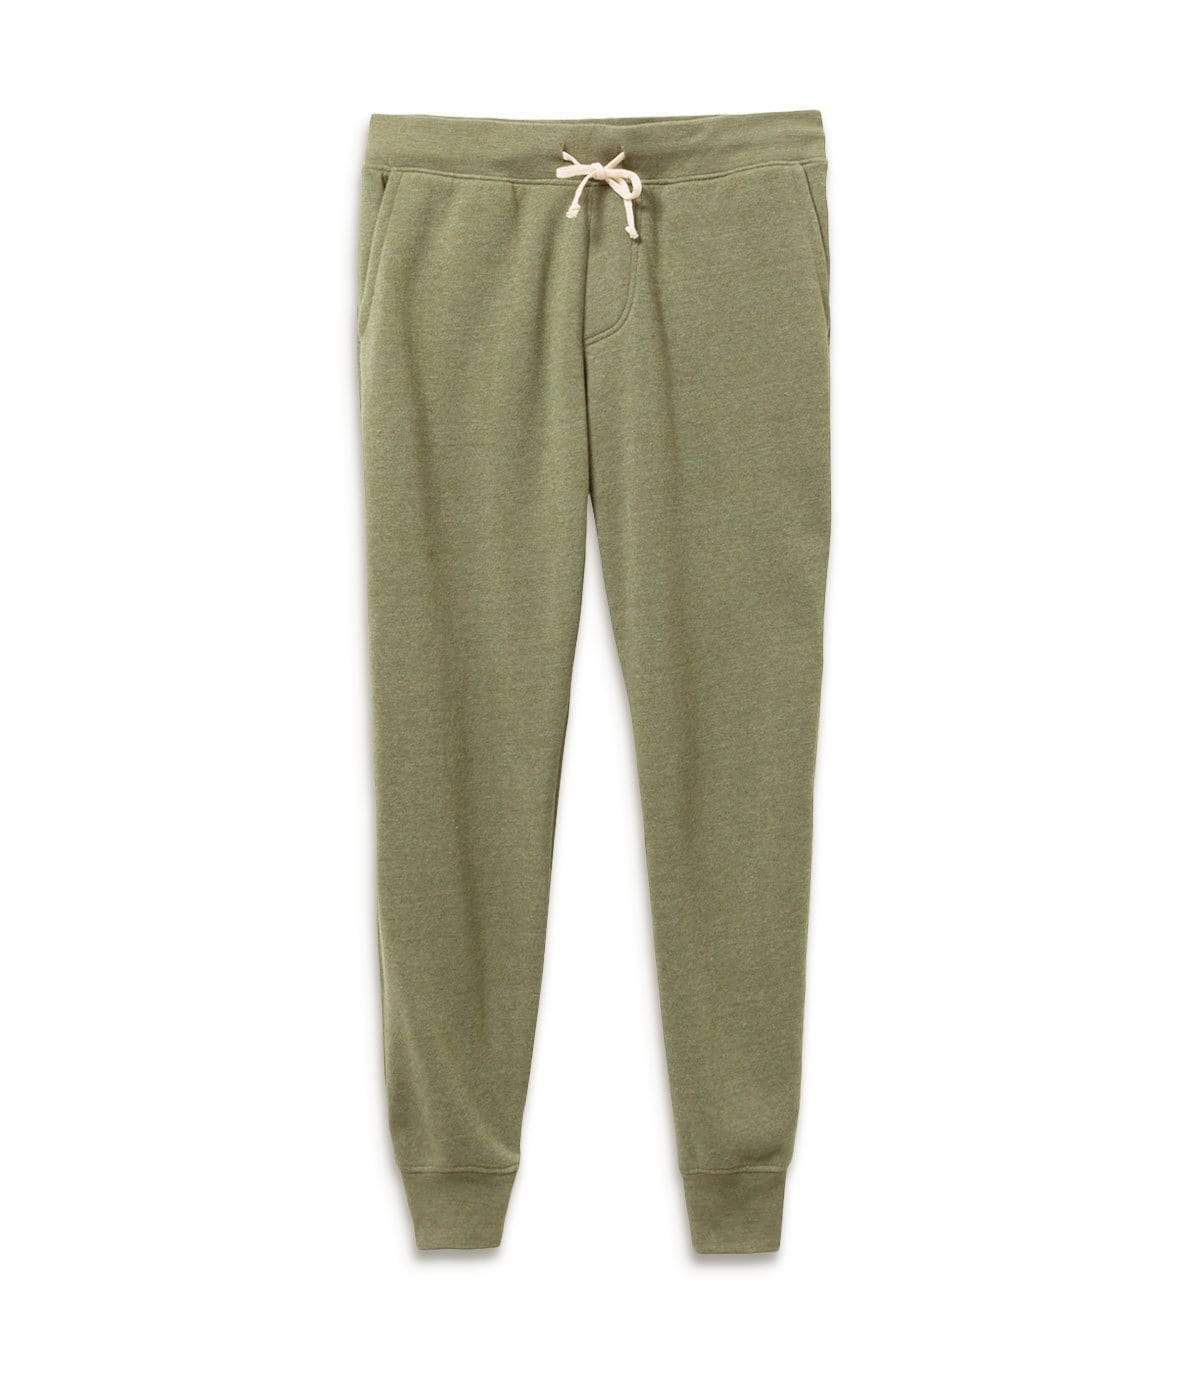 Nayked Apparel Men Men's Ridiculously Soft Vintage Recycled Softest Fleece Joggers